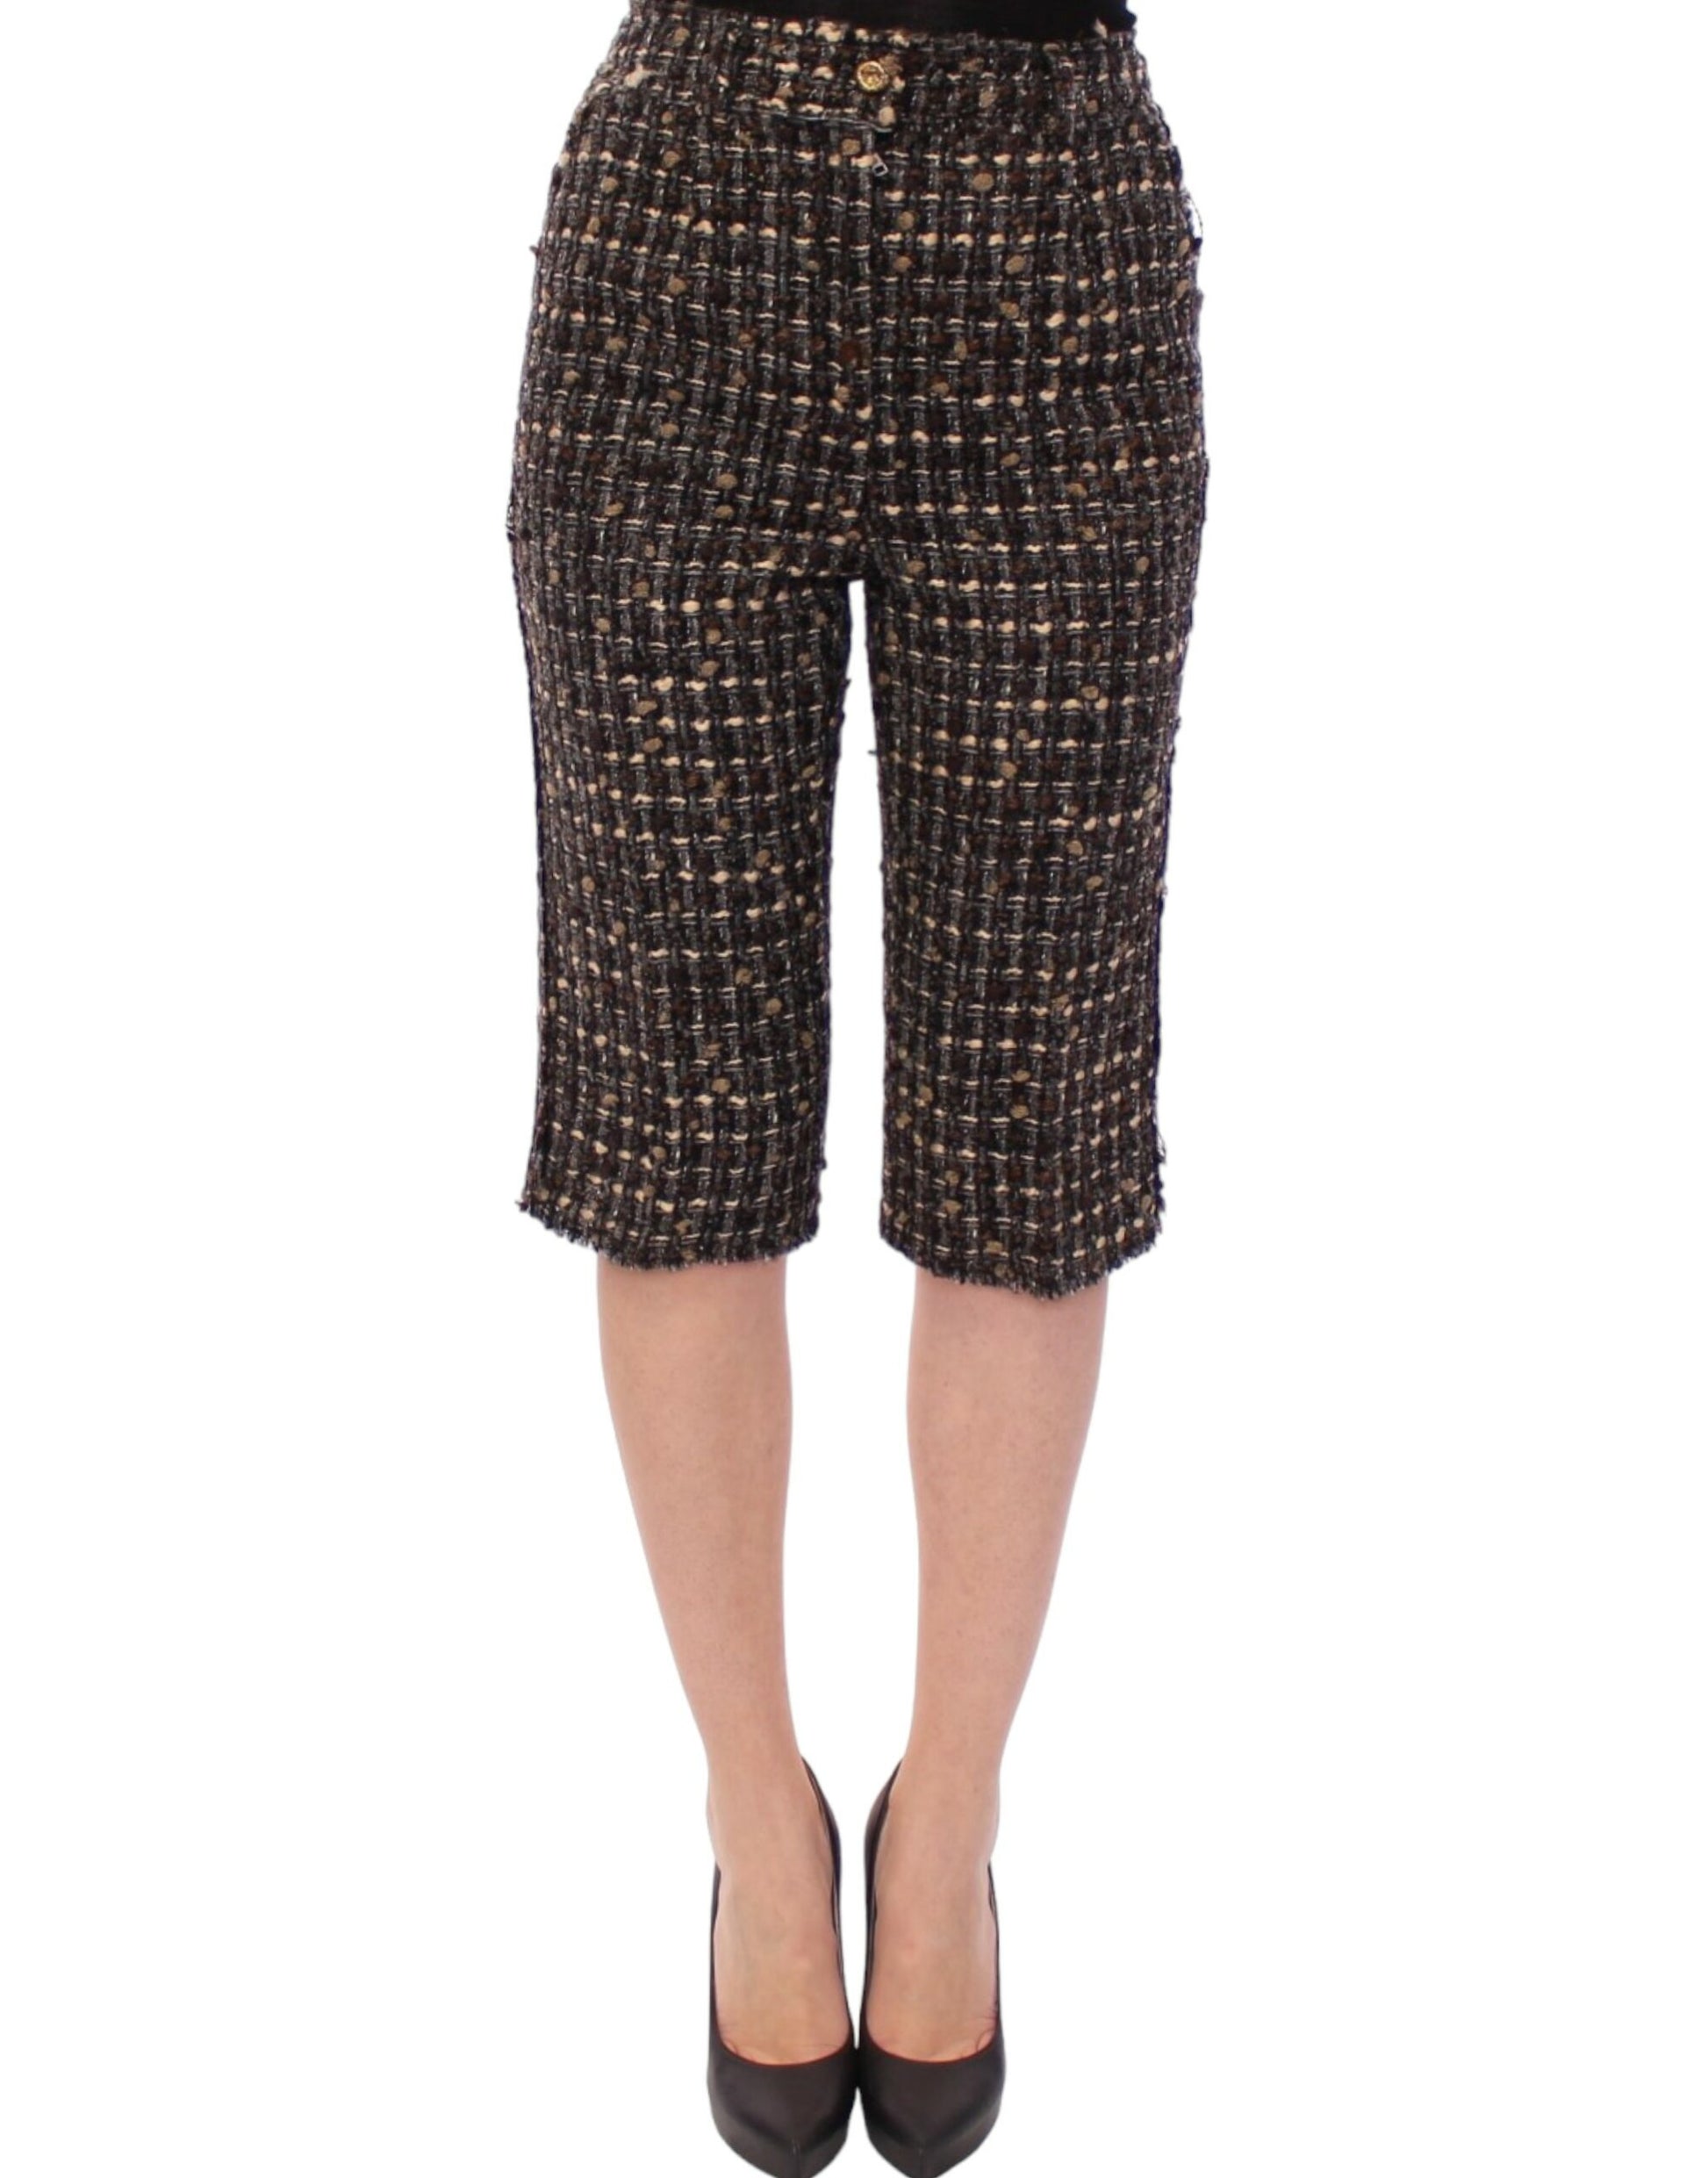 Dolce & Gabbana Multicolor Wool Shorts Pants - Gio Beverly Hills